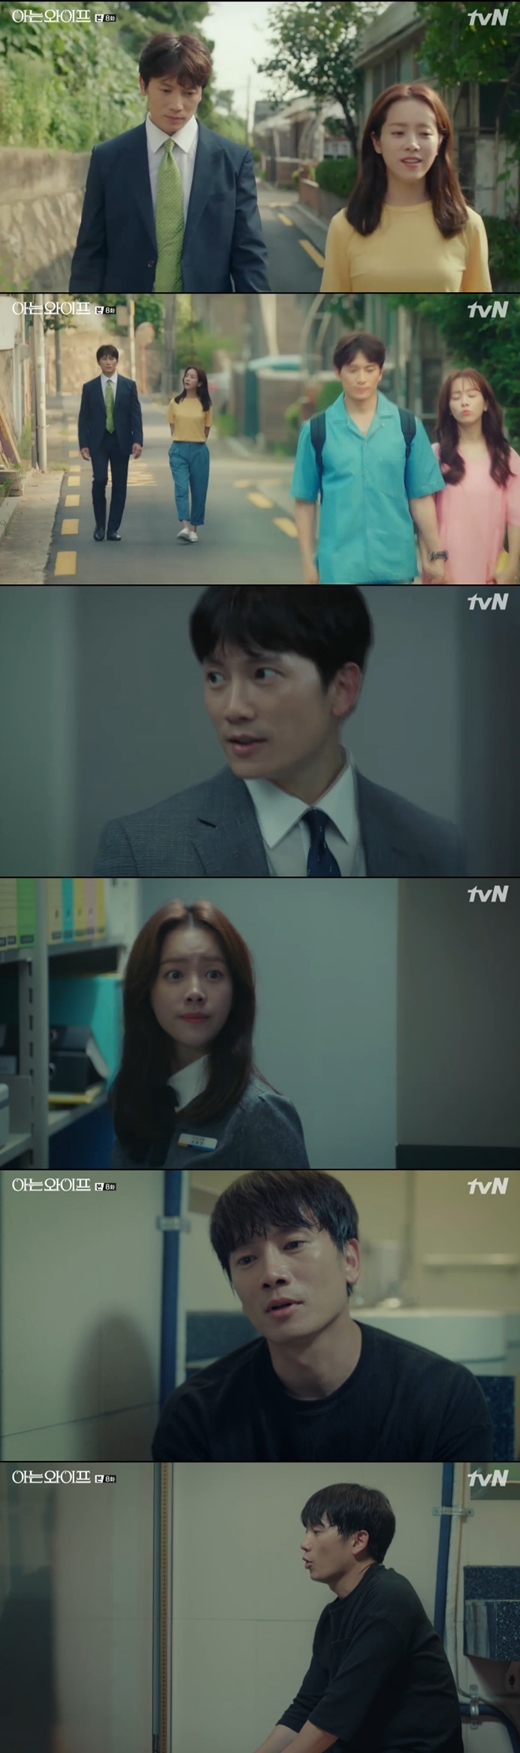 <p>I caught a serious question about the couples love, regret.</p><p>Cable channel tvN broadcasted on the 23rd Waterwood drama Knowing Wipe (Screenwriter Yang Hui Jing Directorate Lee Sang-yeop) 8 times Cha Ju-hyuk (Ji Sung) prepares to release Seo Woo Jin (Han Ji-min) Did.</p><p>Currently Seo Woo Jin is in a relationship with Yoon Jeong-hoo (Chan-sun). Cha Ju-hyuk had an elderly who was in the subway when fate changed, but he said Im transferring a missing piece now, please pray for happiness.</p><p>Cha Ju-hyuk tried to be faithful to his present wife Ichiewon (Strong). However, it was often spoken with Seo Woo Jin. Seo Woo Jin was also inclined to Cha Ju-hyuk who is displayed at a tough moment, but since he knew that he was a married man, he tried to give up.</p><p>Seo Woo Jin said, I am trying to see if it is not a word inside, this time I will try to see it, this time I will try borrowing to adults alone in another way, Cha Ju-hyuk I hid my heart.</p><p>Cha Ju-hyuk and Seo Woo Jin forgot each others love in a tiring couple life. Every time I fought and slandered each other, I left only scratches. Especially Cha Ju-hyuk thought only that his wife Seo Woo Jin became a monster, and he did not care about his being a wife created as a monster.</p><p>However, my fate changed, I saw Seo Woo Jin correctly, regretted my behavior, I was born into a mature love. Even in the destiny where two people changed each other s love is kept secret after the matter how the obstacles will overcome the progress will be noticed.</p>